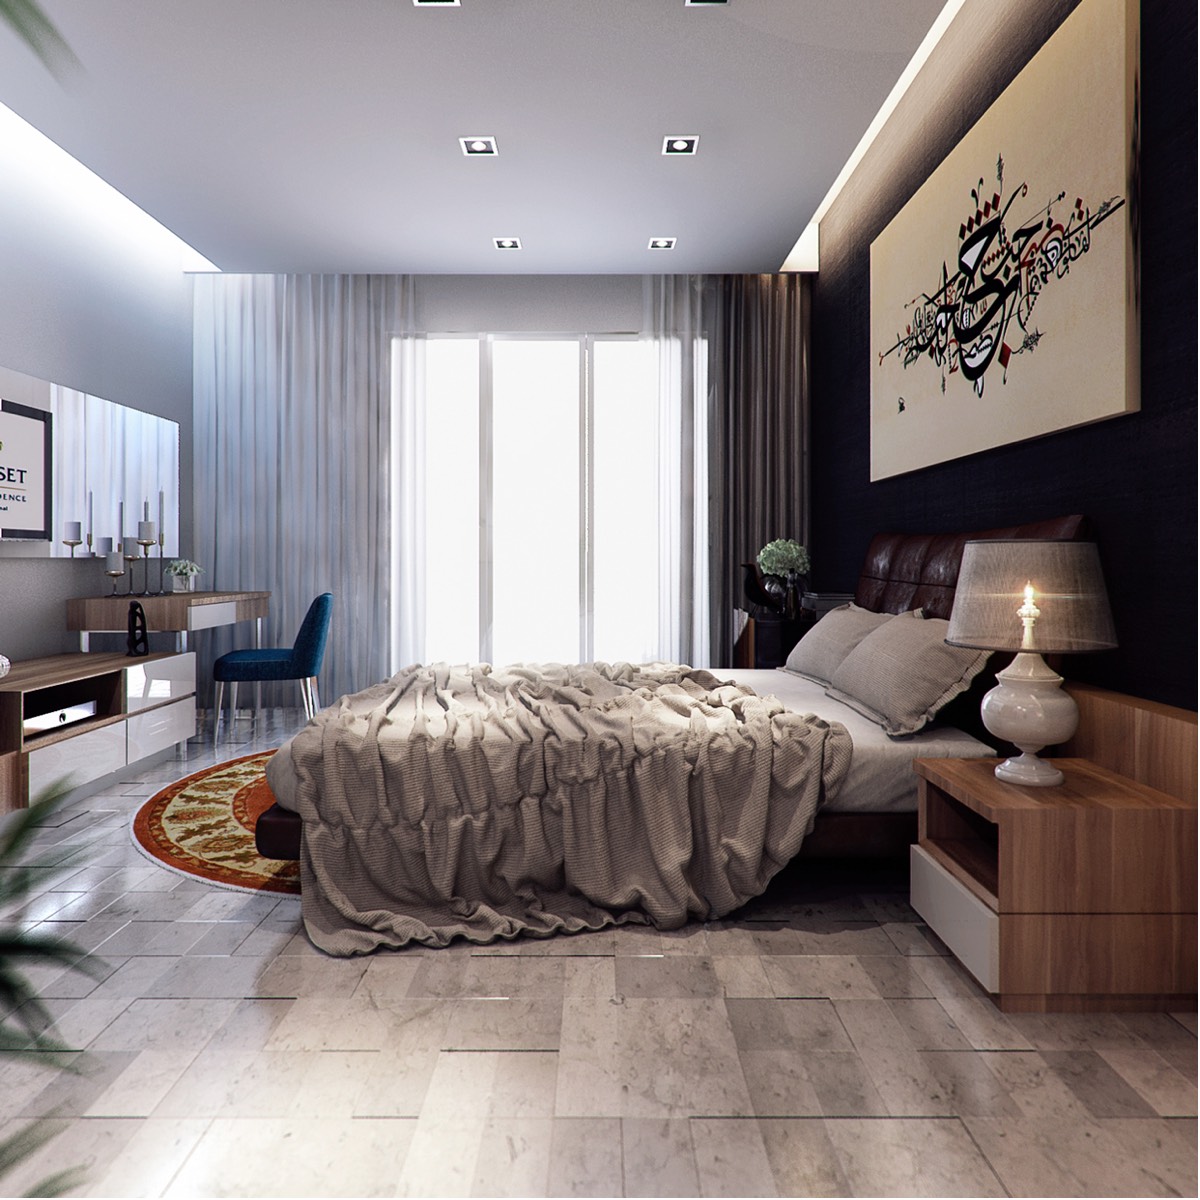 10 Luxury Bedroom Themes and Design Ideas - RooHome